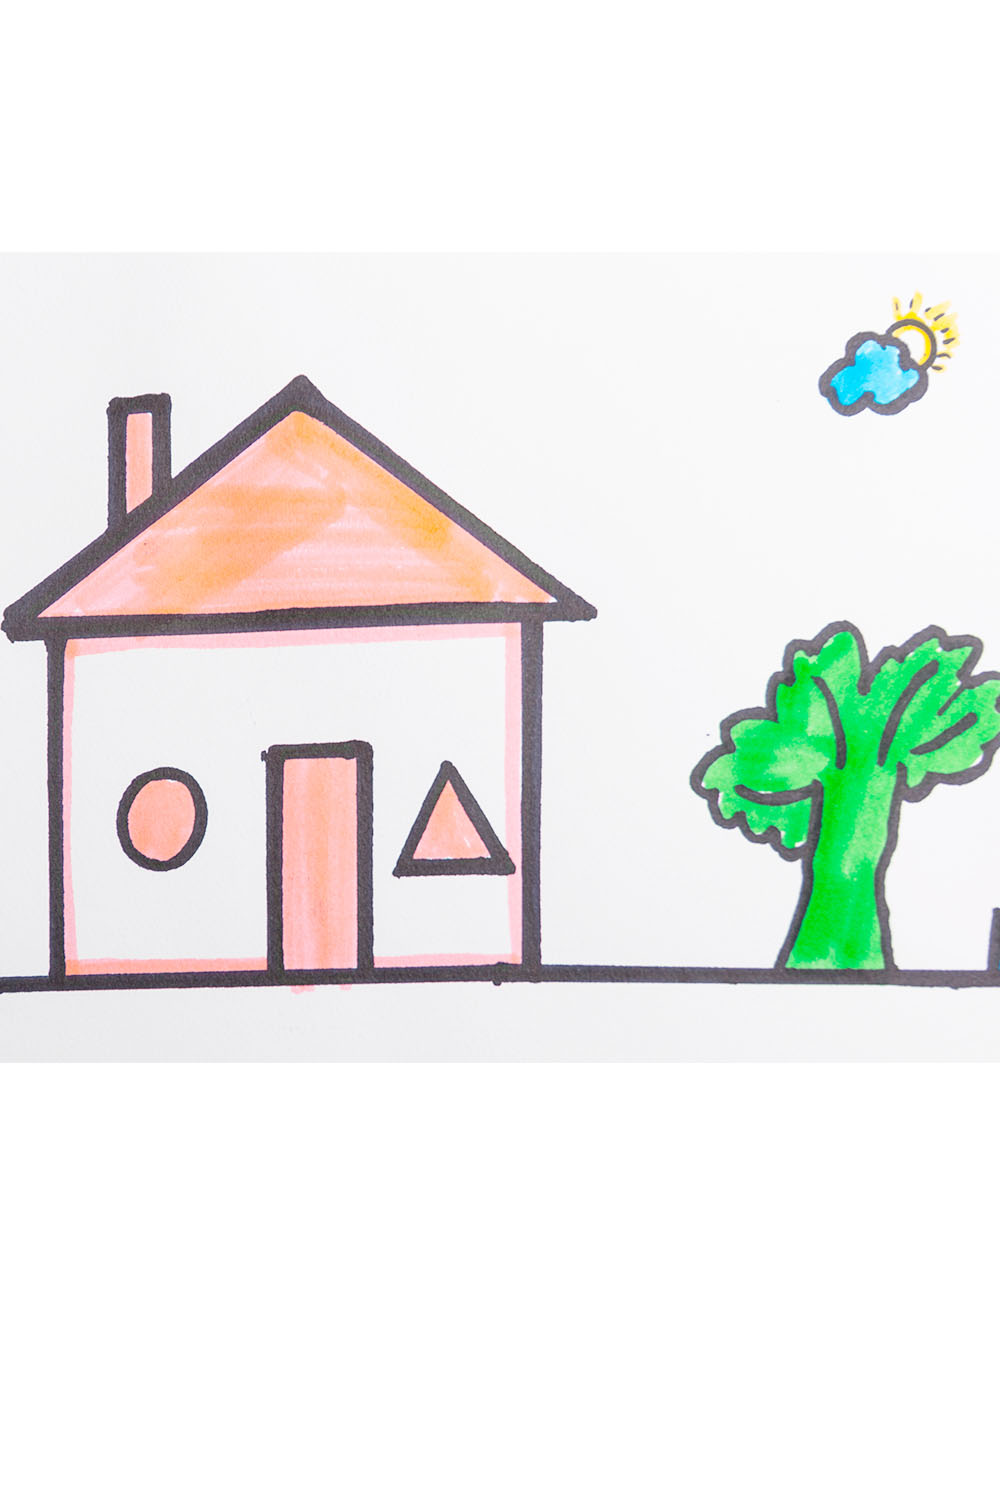 Draw a house